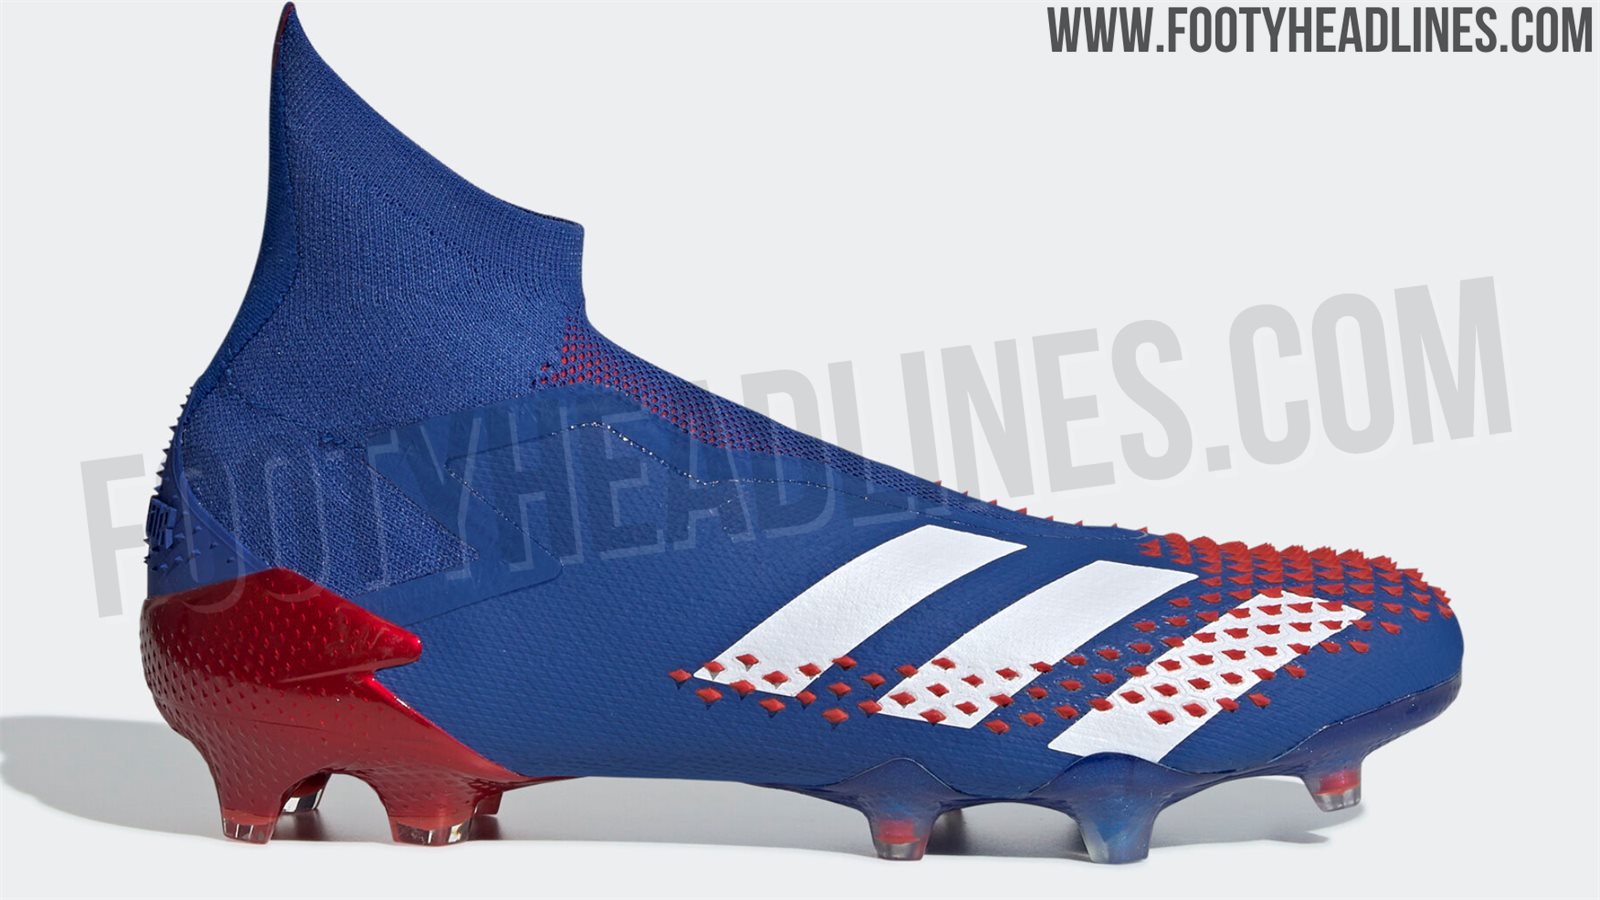 Adidas Predator Mania Project Completed – Boots Vault